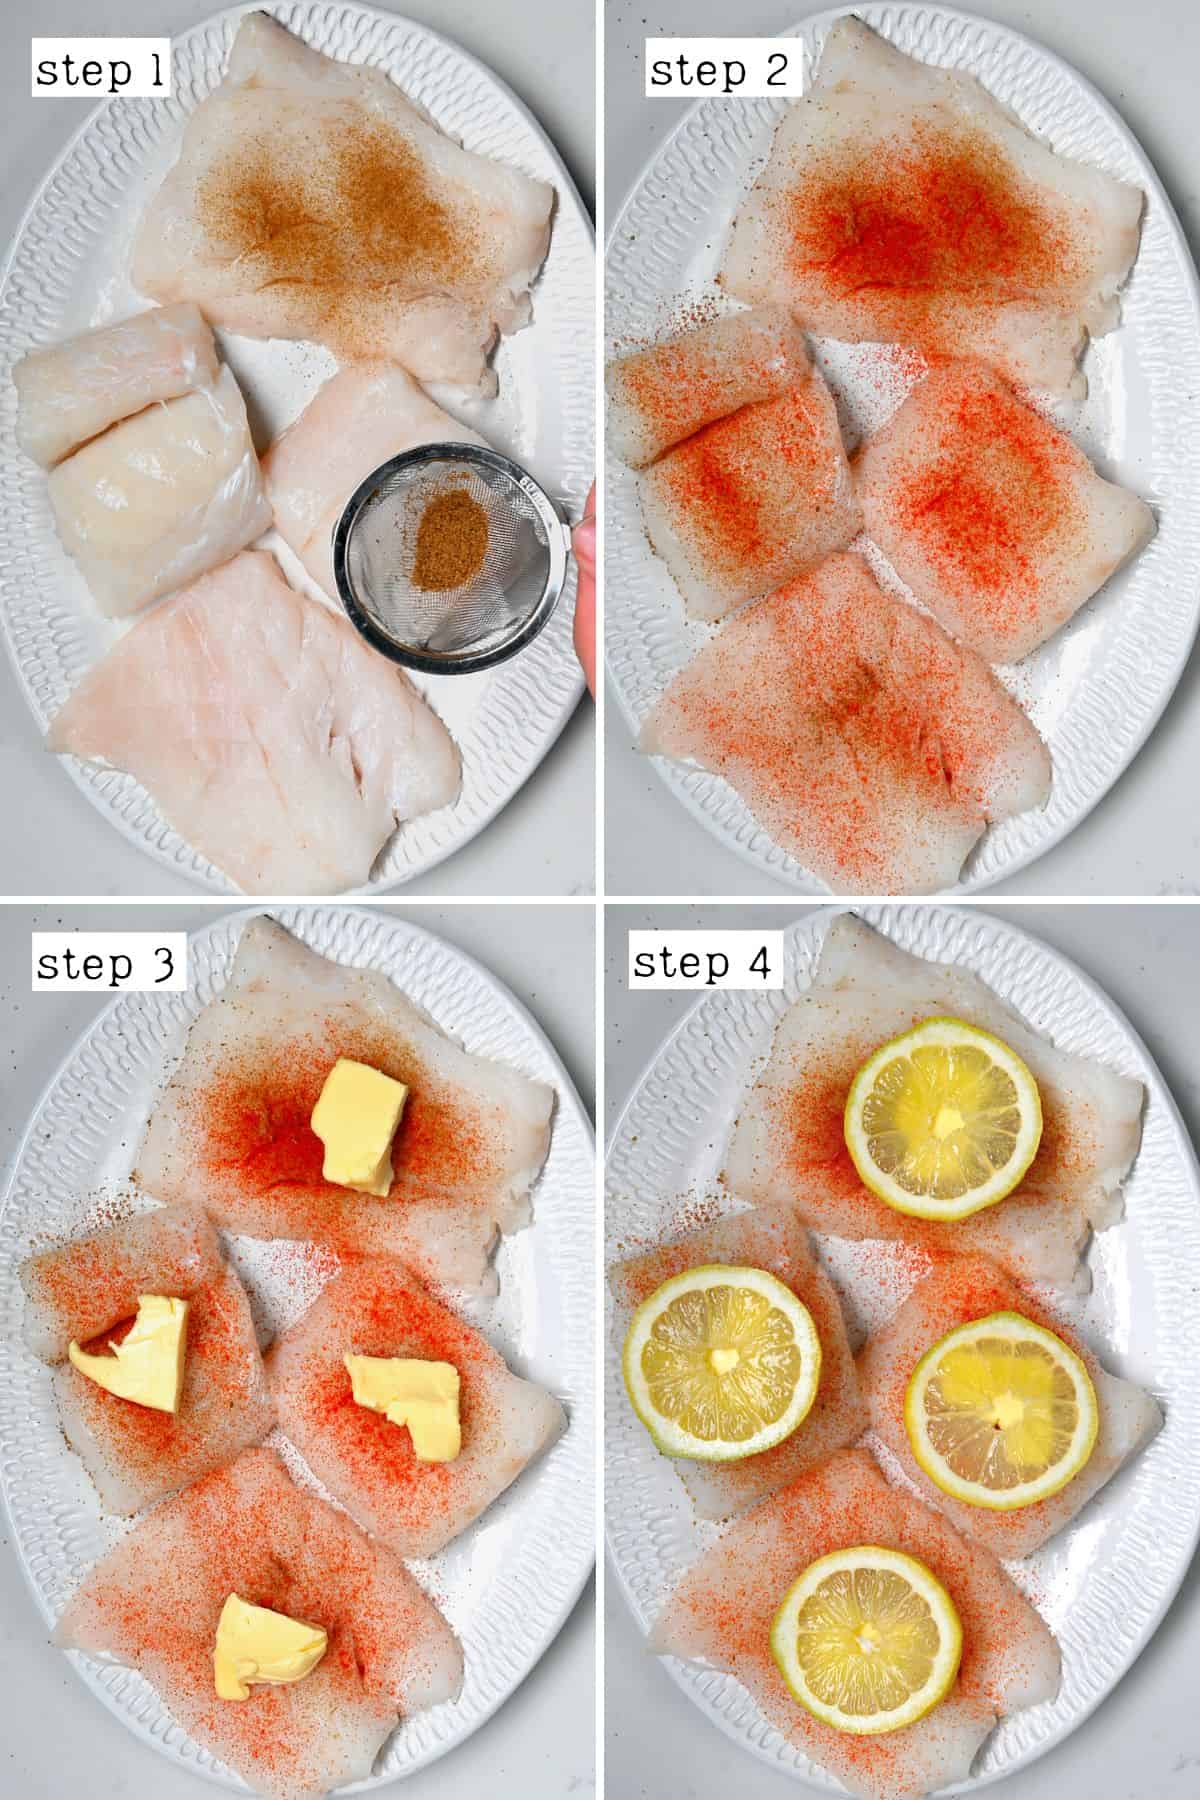 Steps for preparing cod for cooking